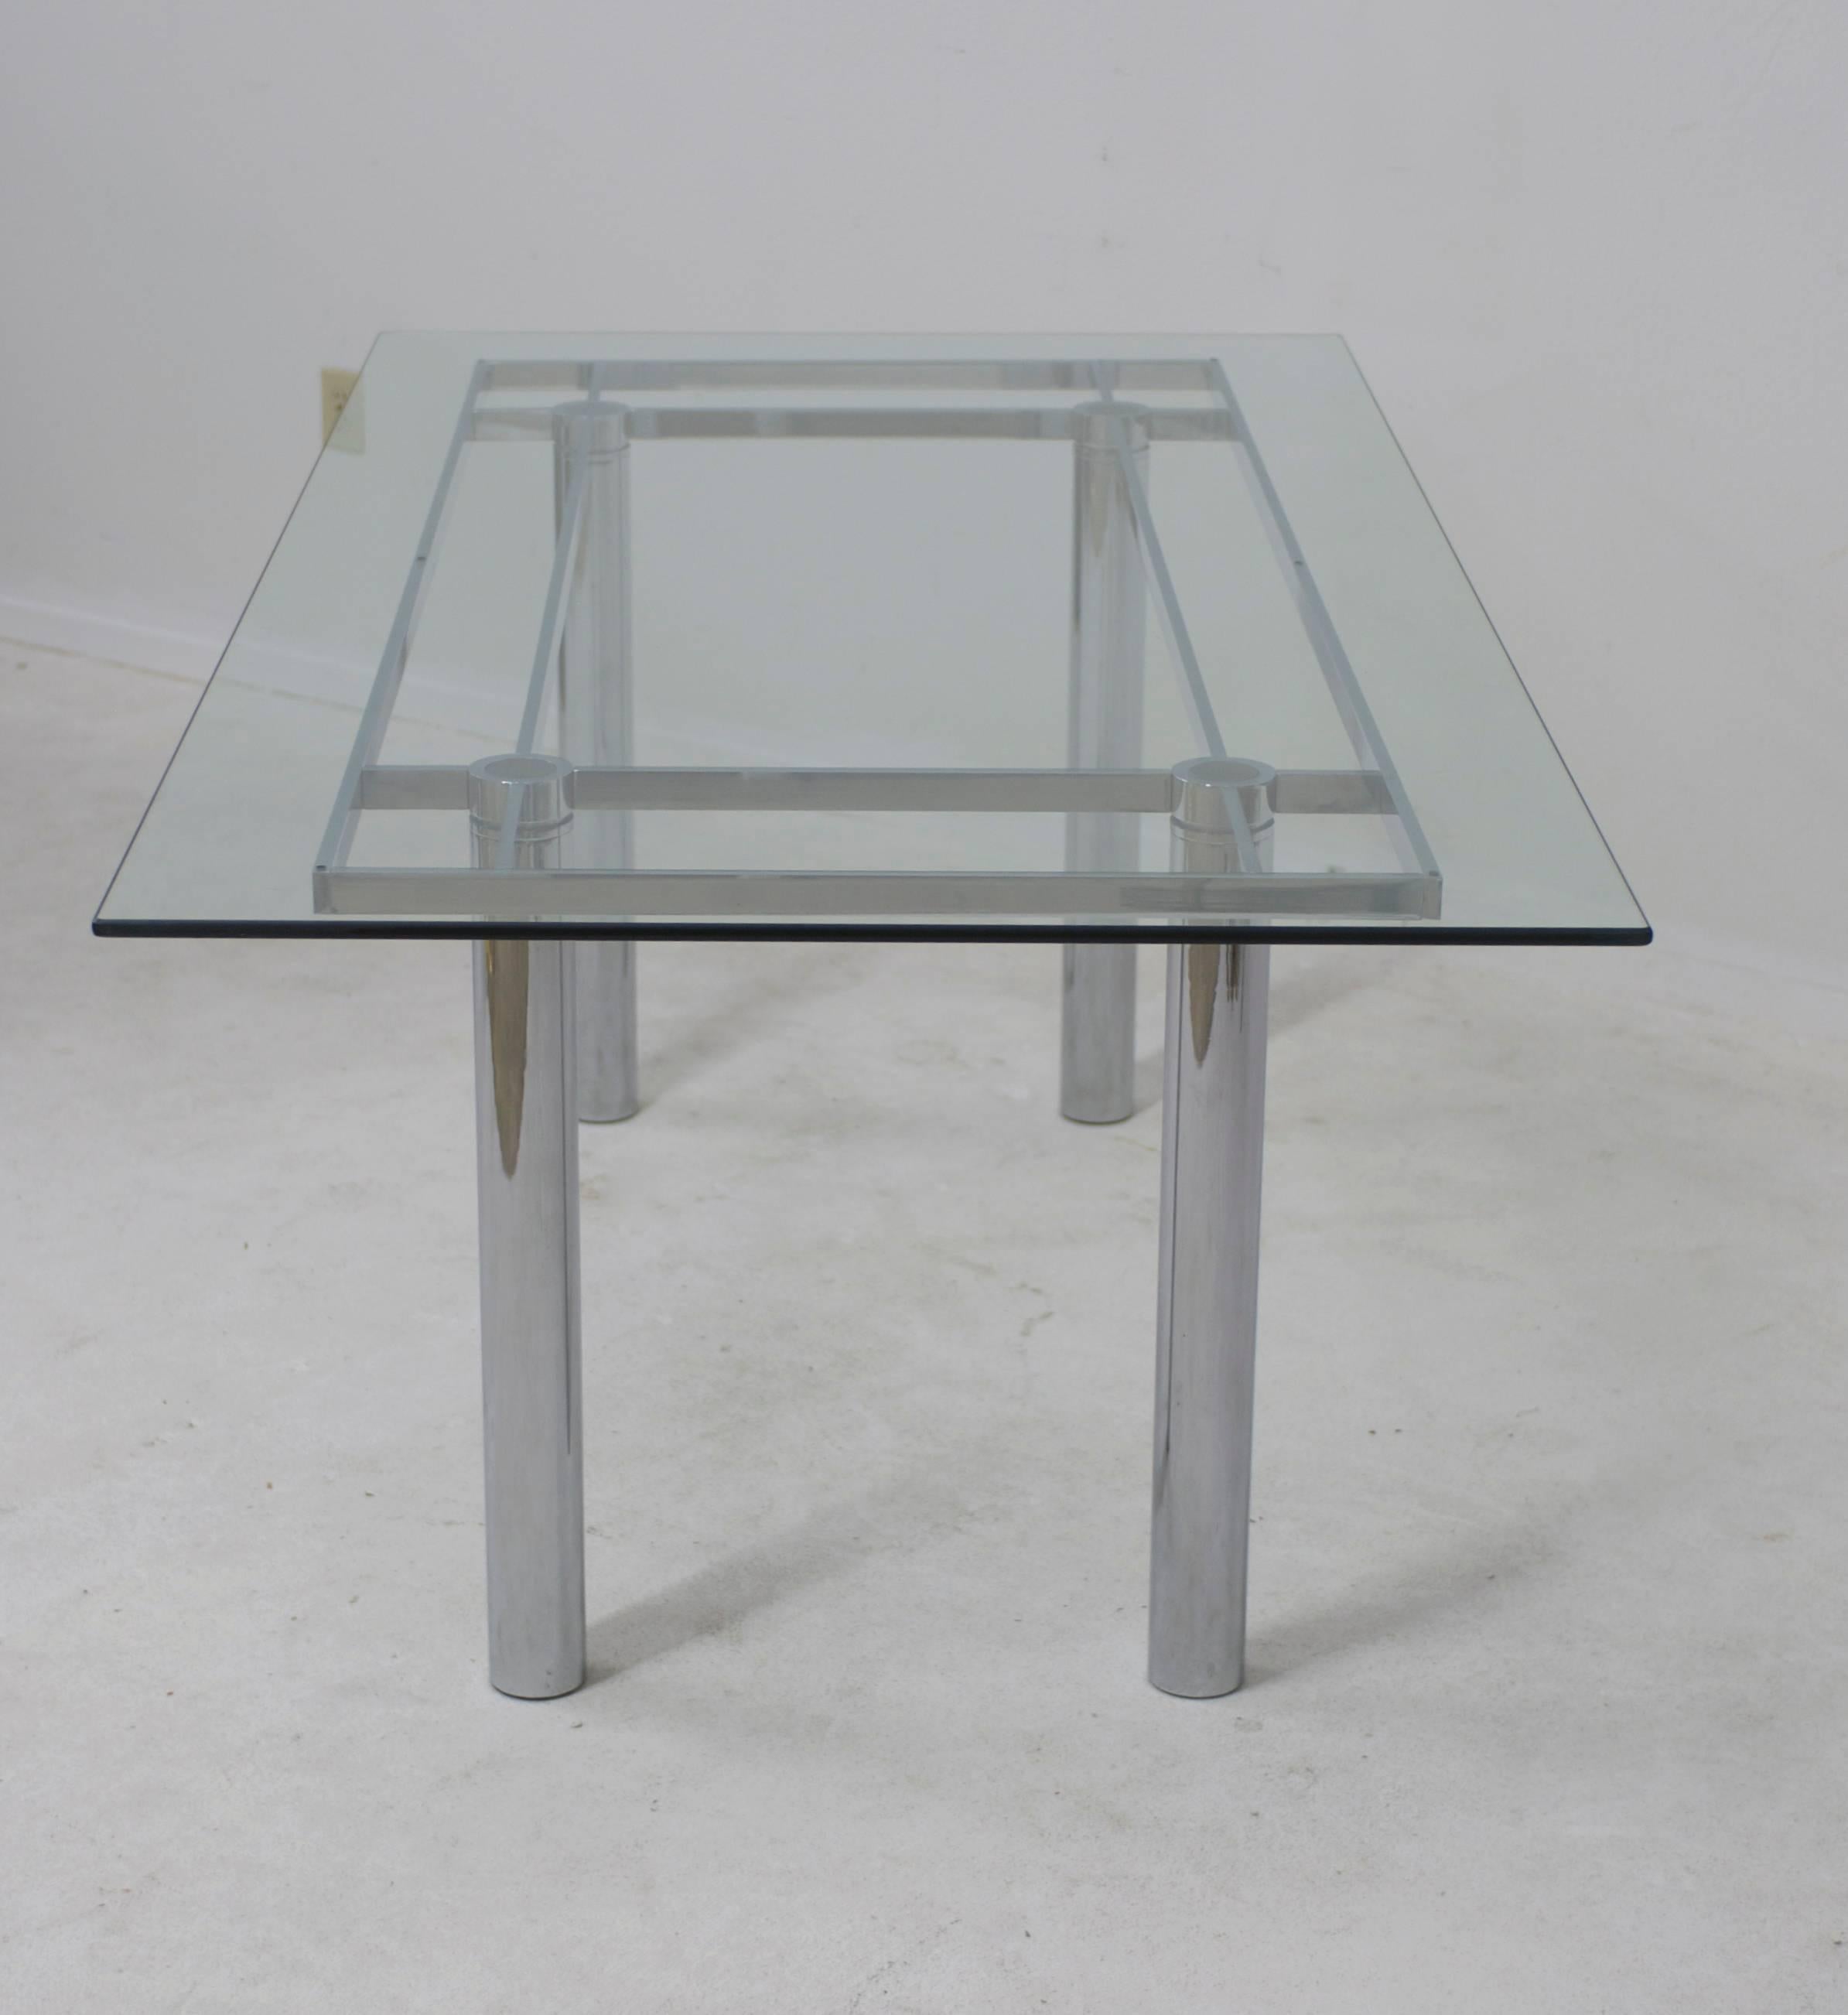 The Tobia Scarpa 'Andre' table or desk originally designed for Gavina and later produced by Knoll. Made of steel with a polished chrome finish this table can be shipped with or without the glass. The table base size is 69